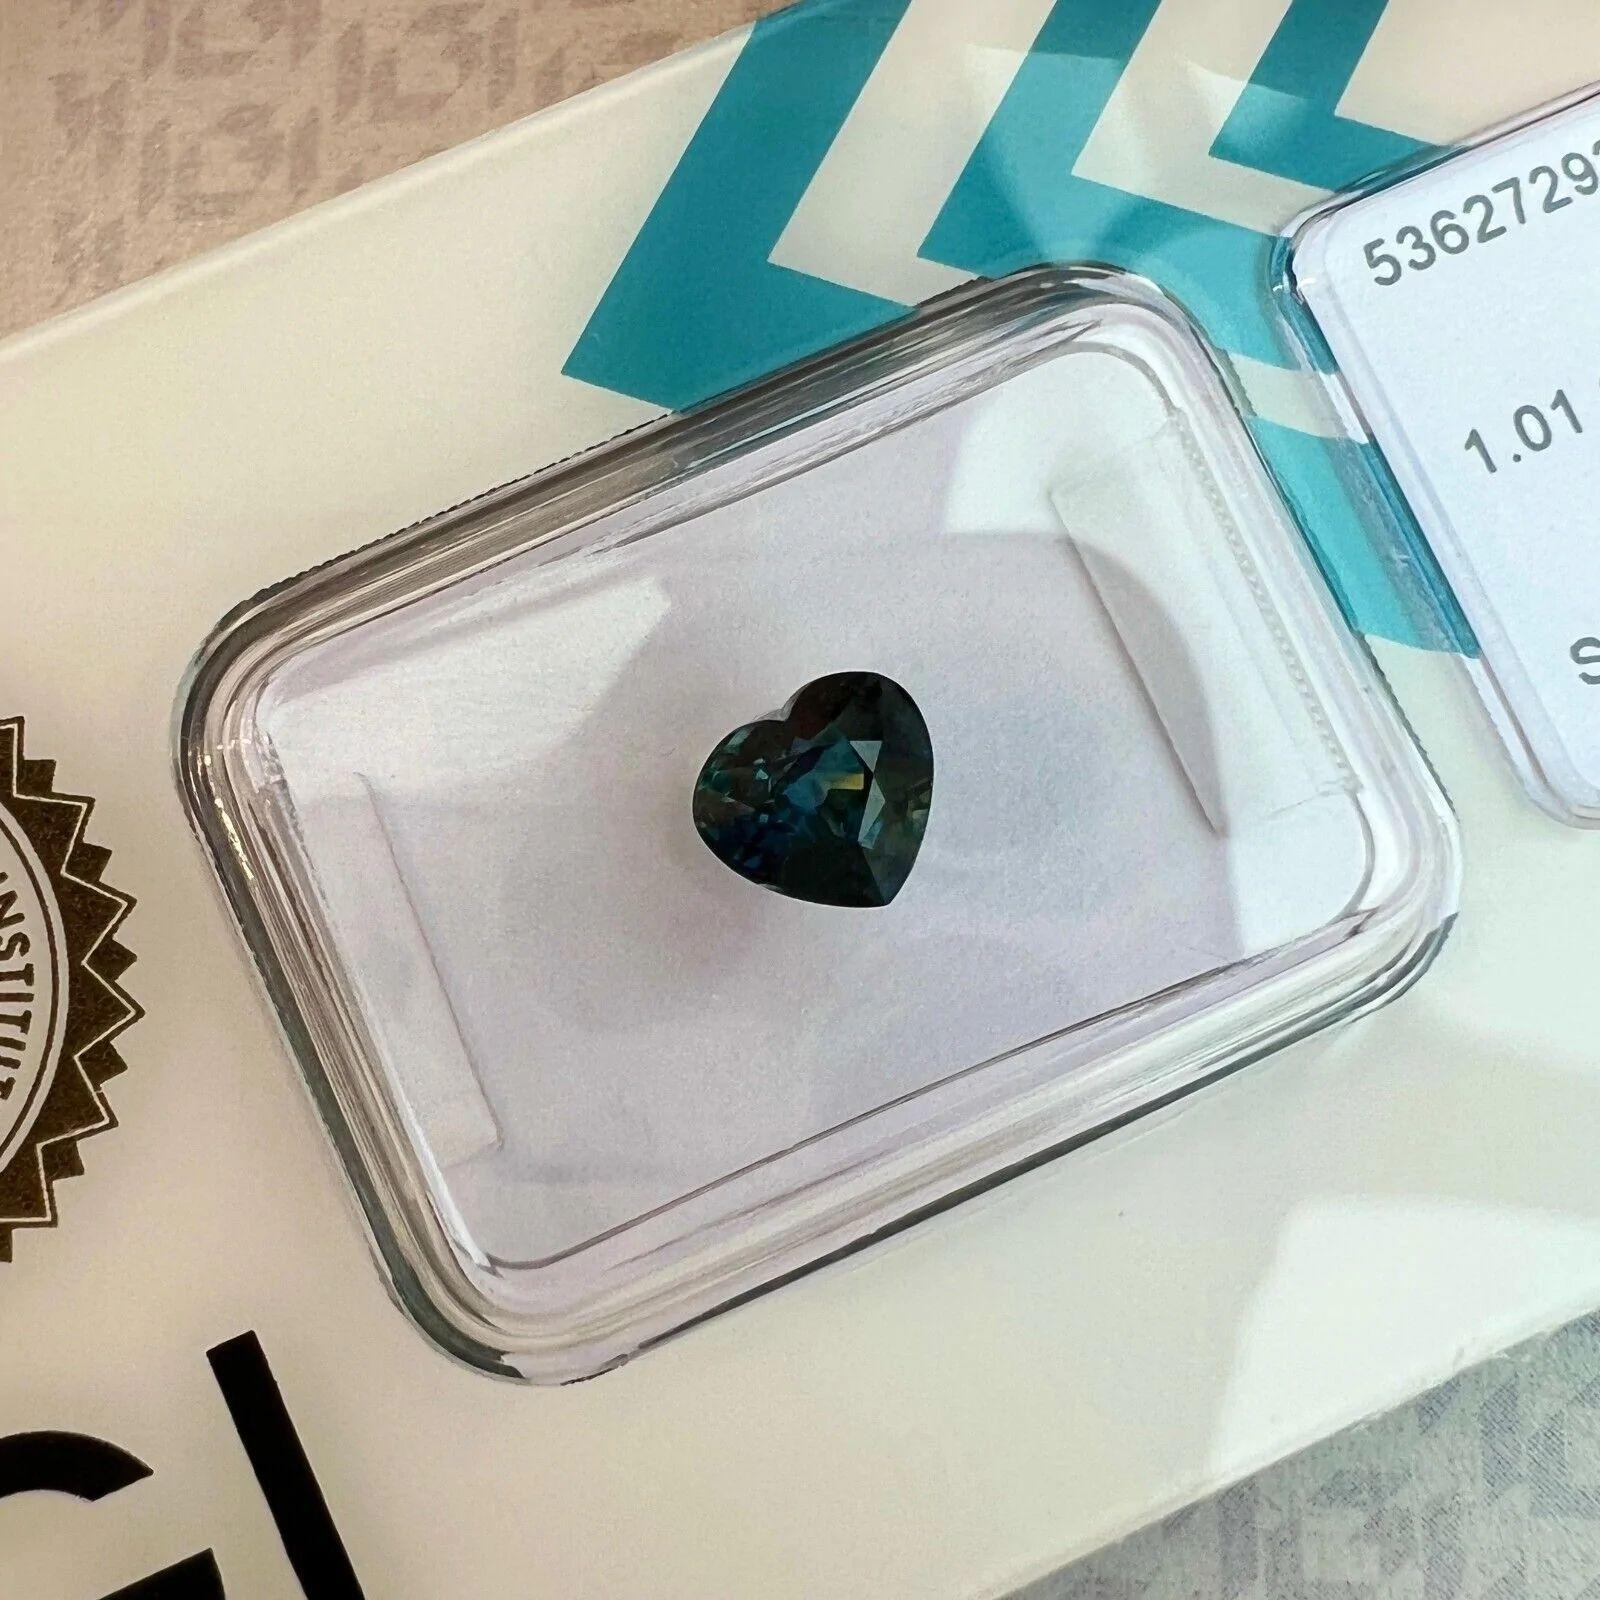 Unique 1.01ct Deep Yellowish Blue Rare Sapphire Heart Cut IGI Certified

Unique Colour Deep Yellowish Blue Sapphire In IGI Blister.
1.01 Carat with an excellent heart cut and very good clarity, a clean stone.
Fully certified and sealed by IGI in